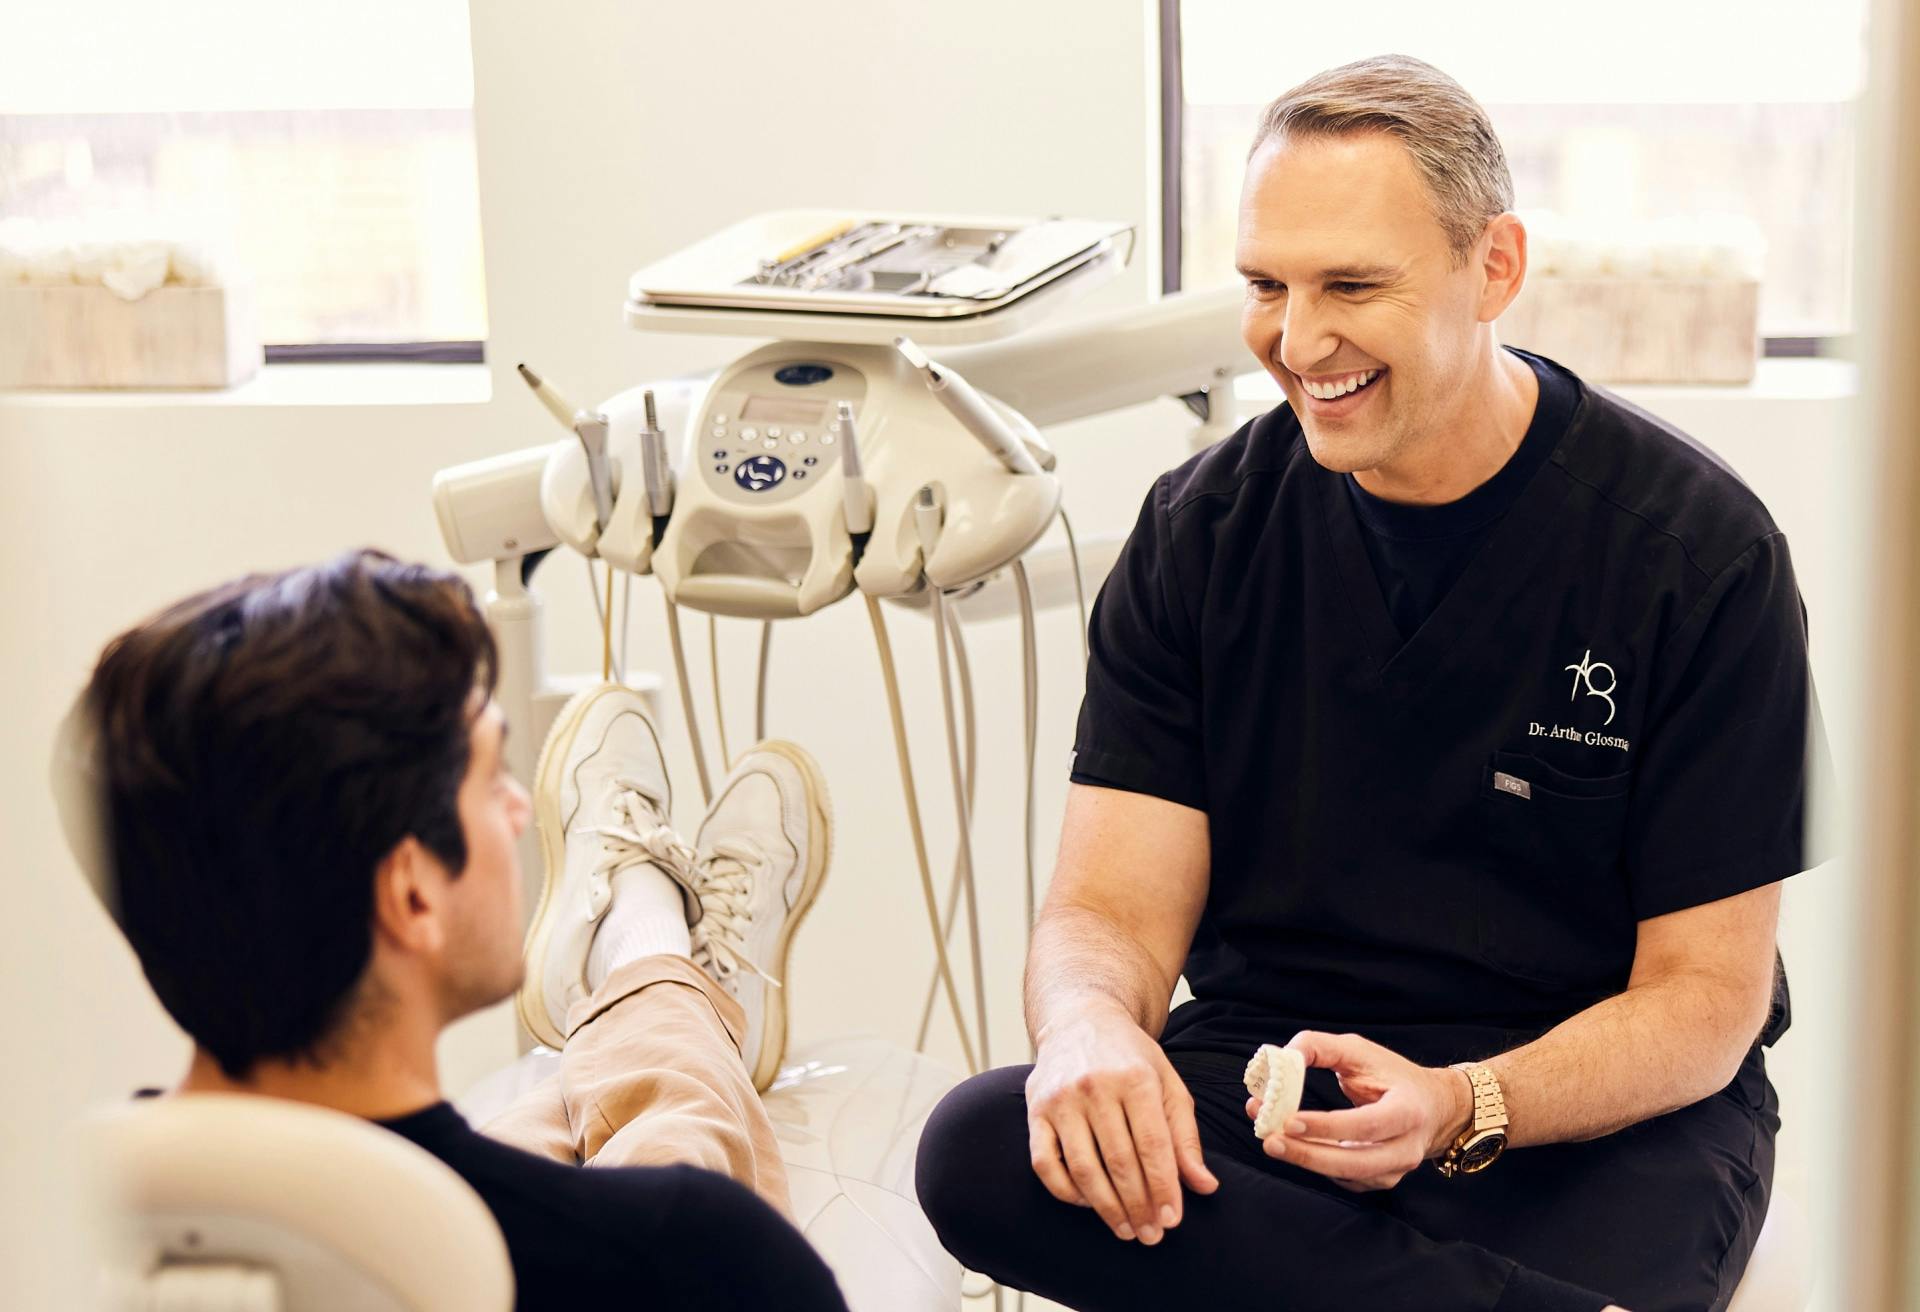 Dr. Glosman, a cosmetic dentist in Beverly Hills, speaking with a male patient